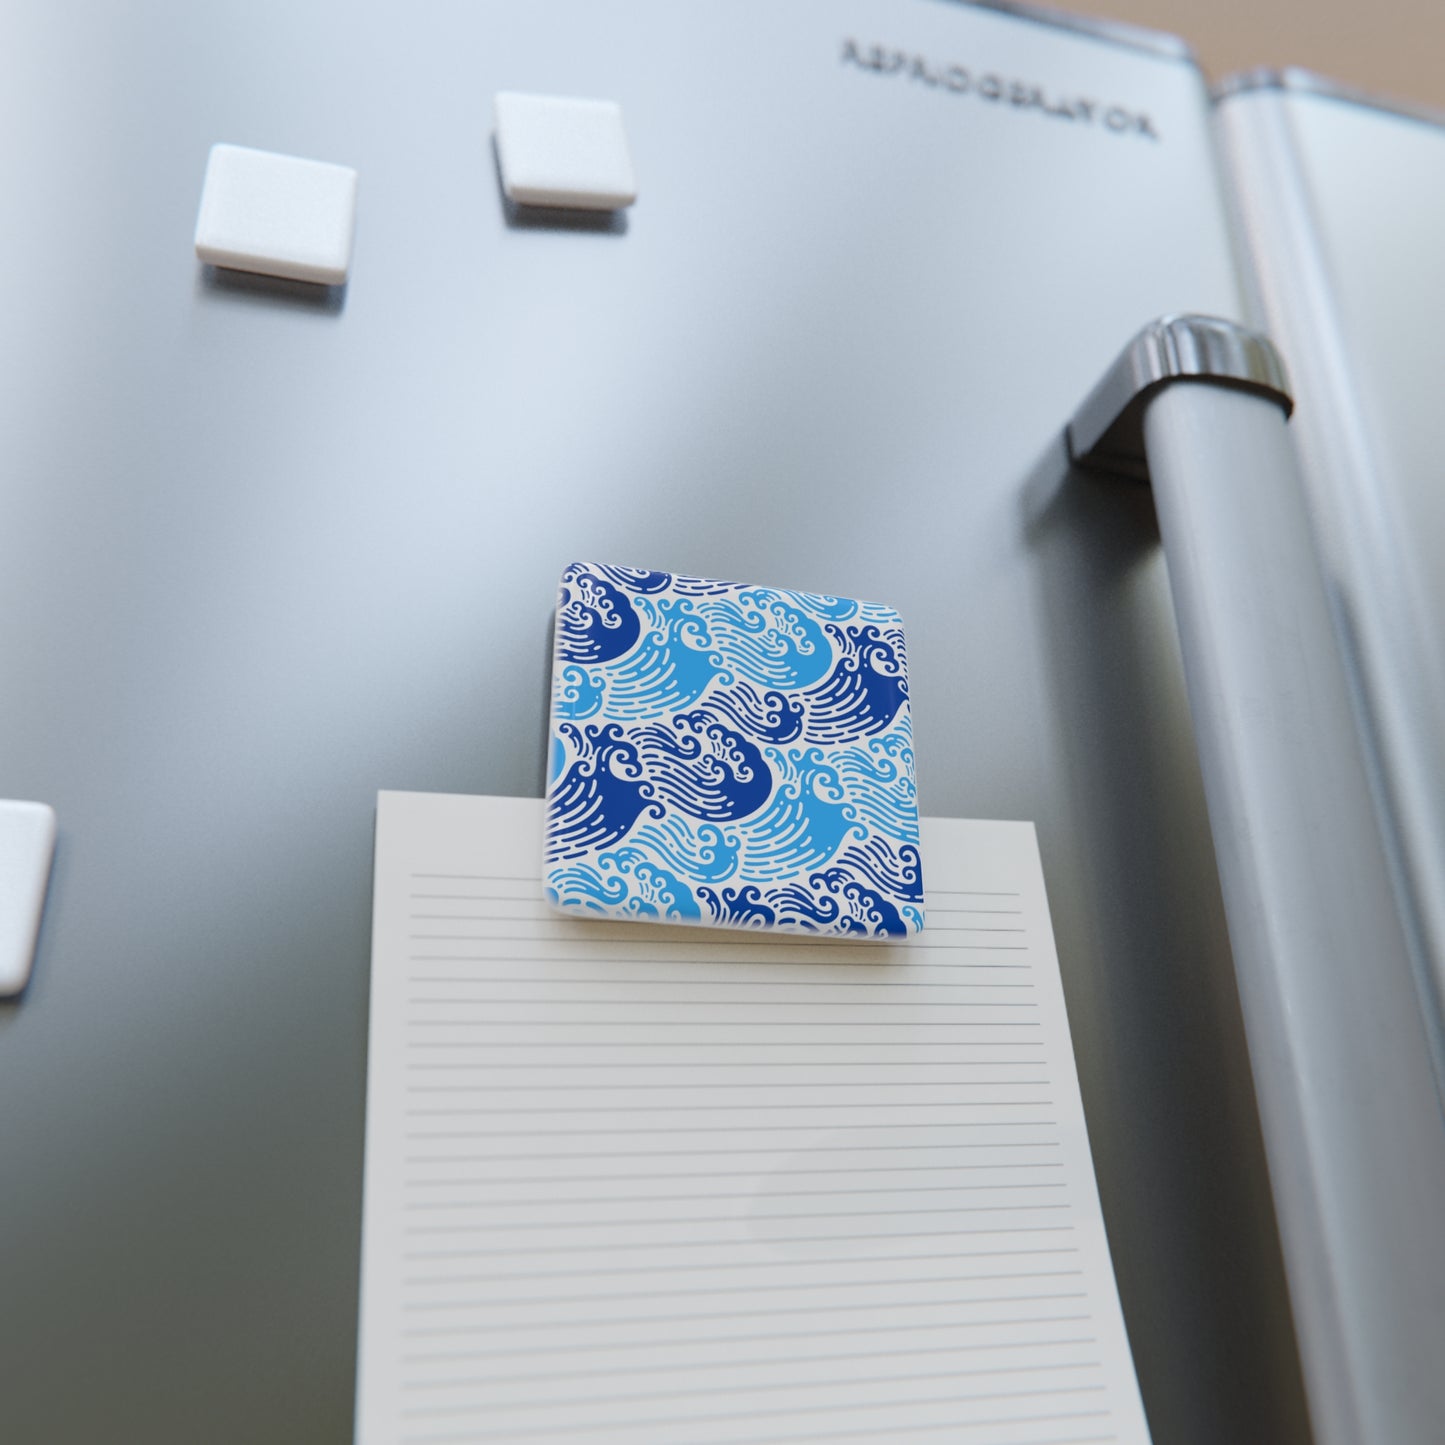 Ming Dynasty Waves Blue and White Chinese Woodblock Print Decorative Kitchen Refrigerator Porcelain Magnet, Square